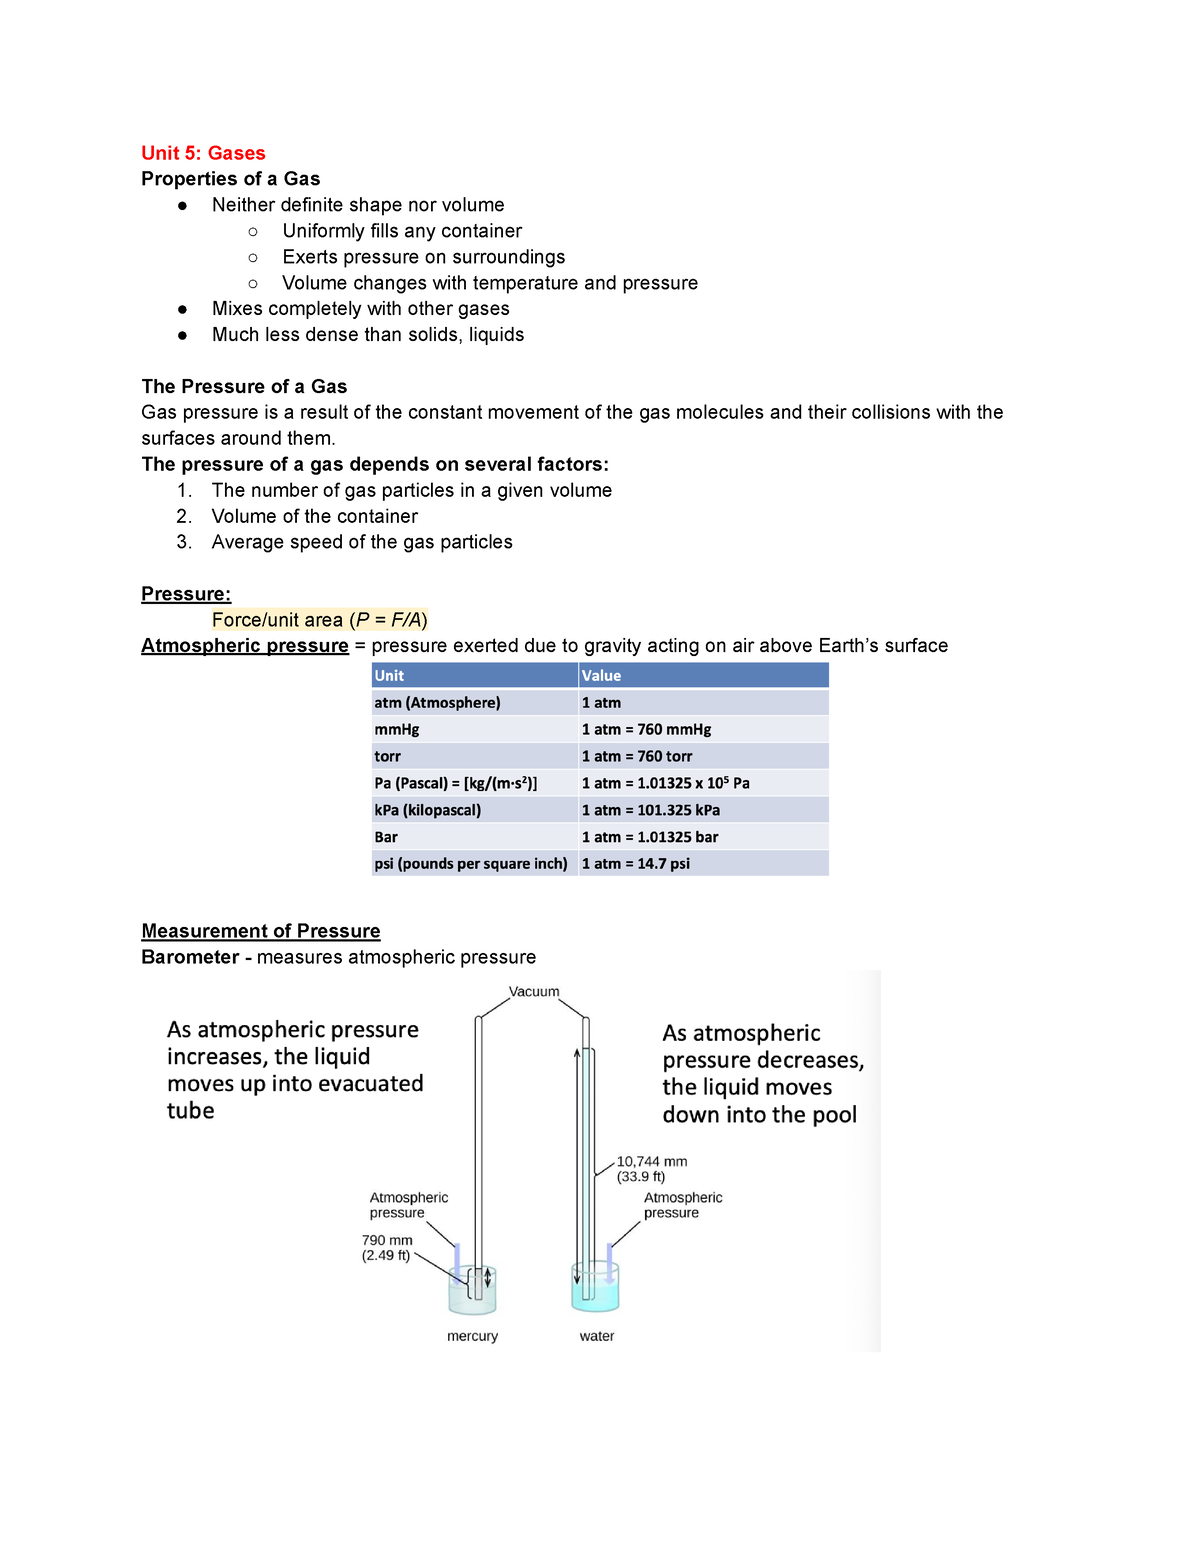 Unit 5 Gases - Lecture Notes and Practice Materials - Unit 5: Gases ...